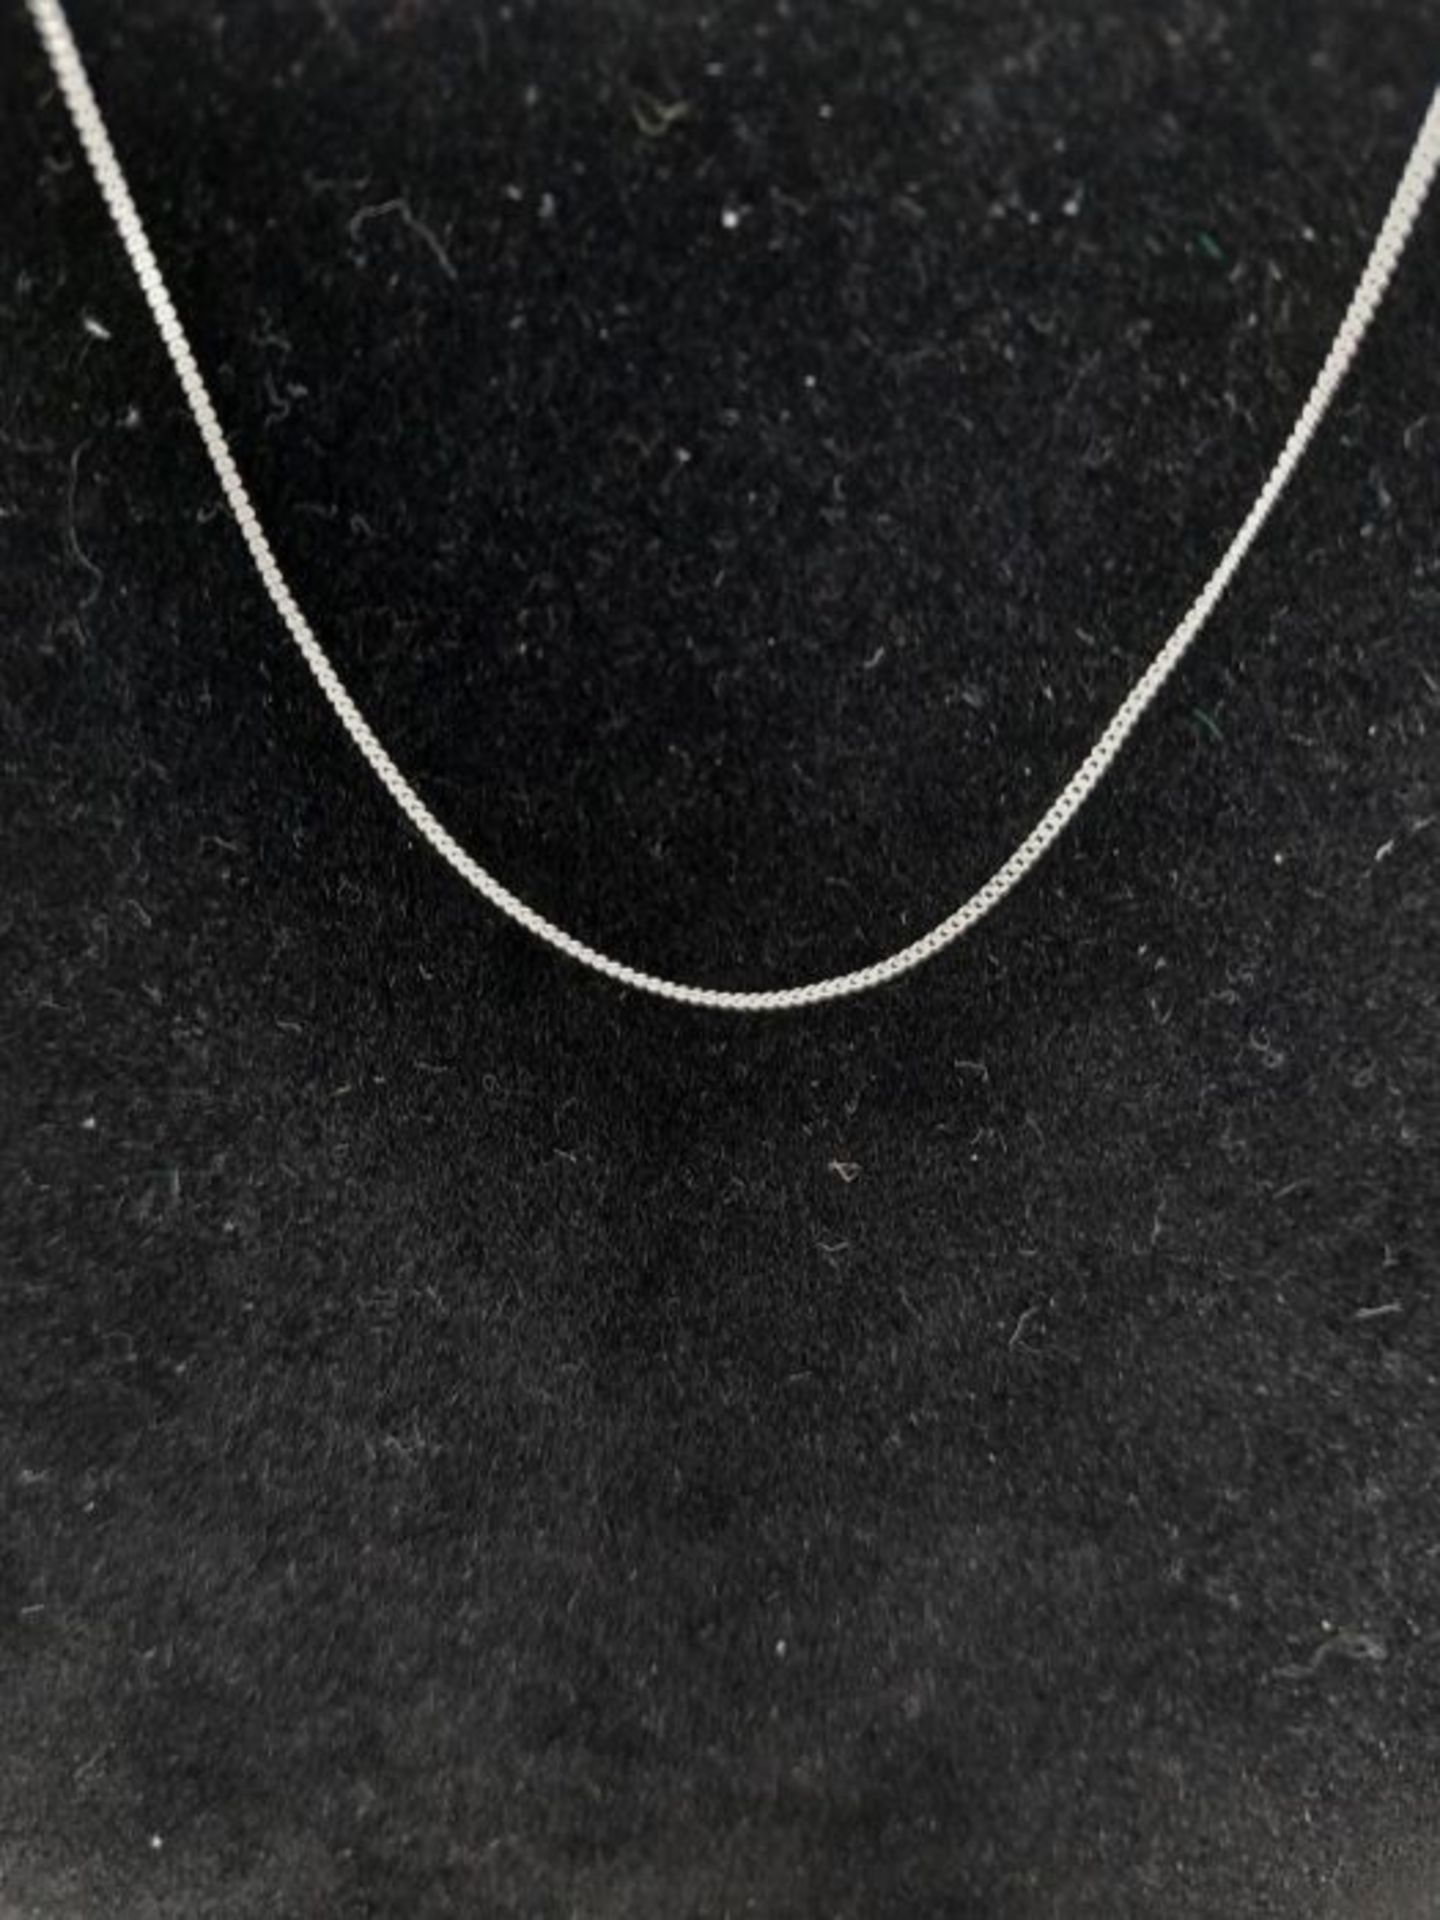 Materia #K32 Jewellery Fine 925 Silver Chain Curb 1 mm - Women?s Necklace Silver in 40 - Image 3 of 3